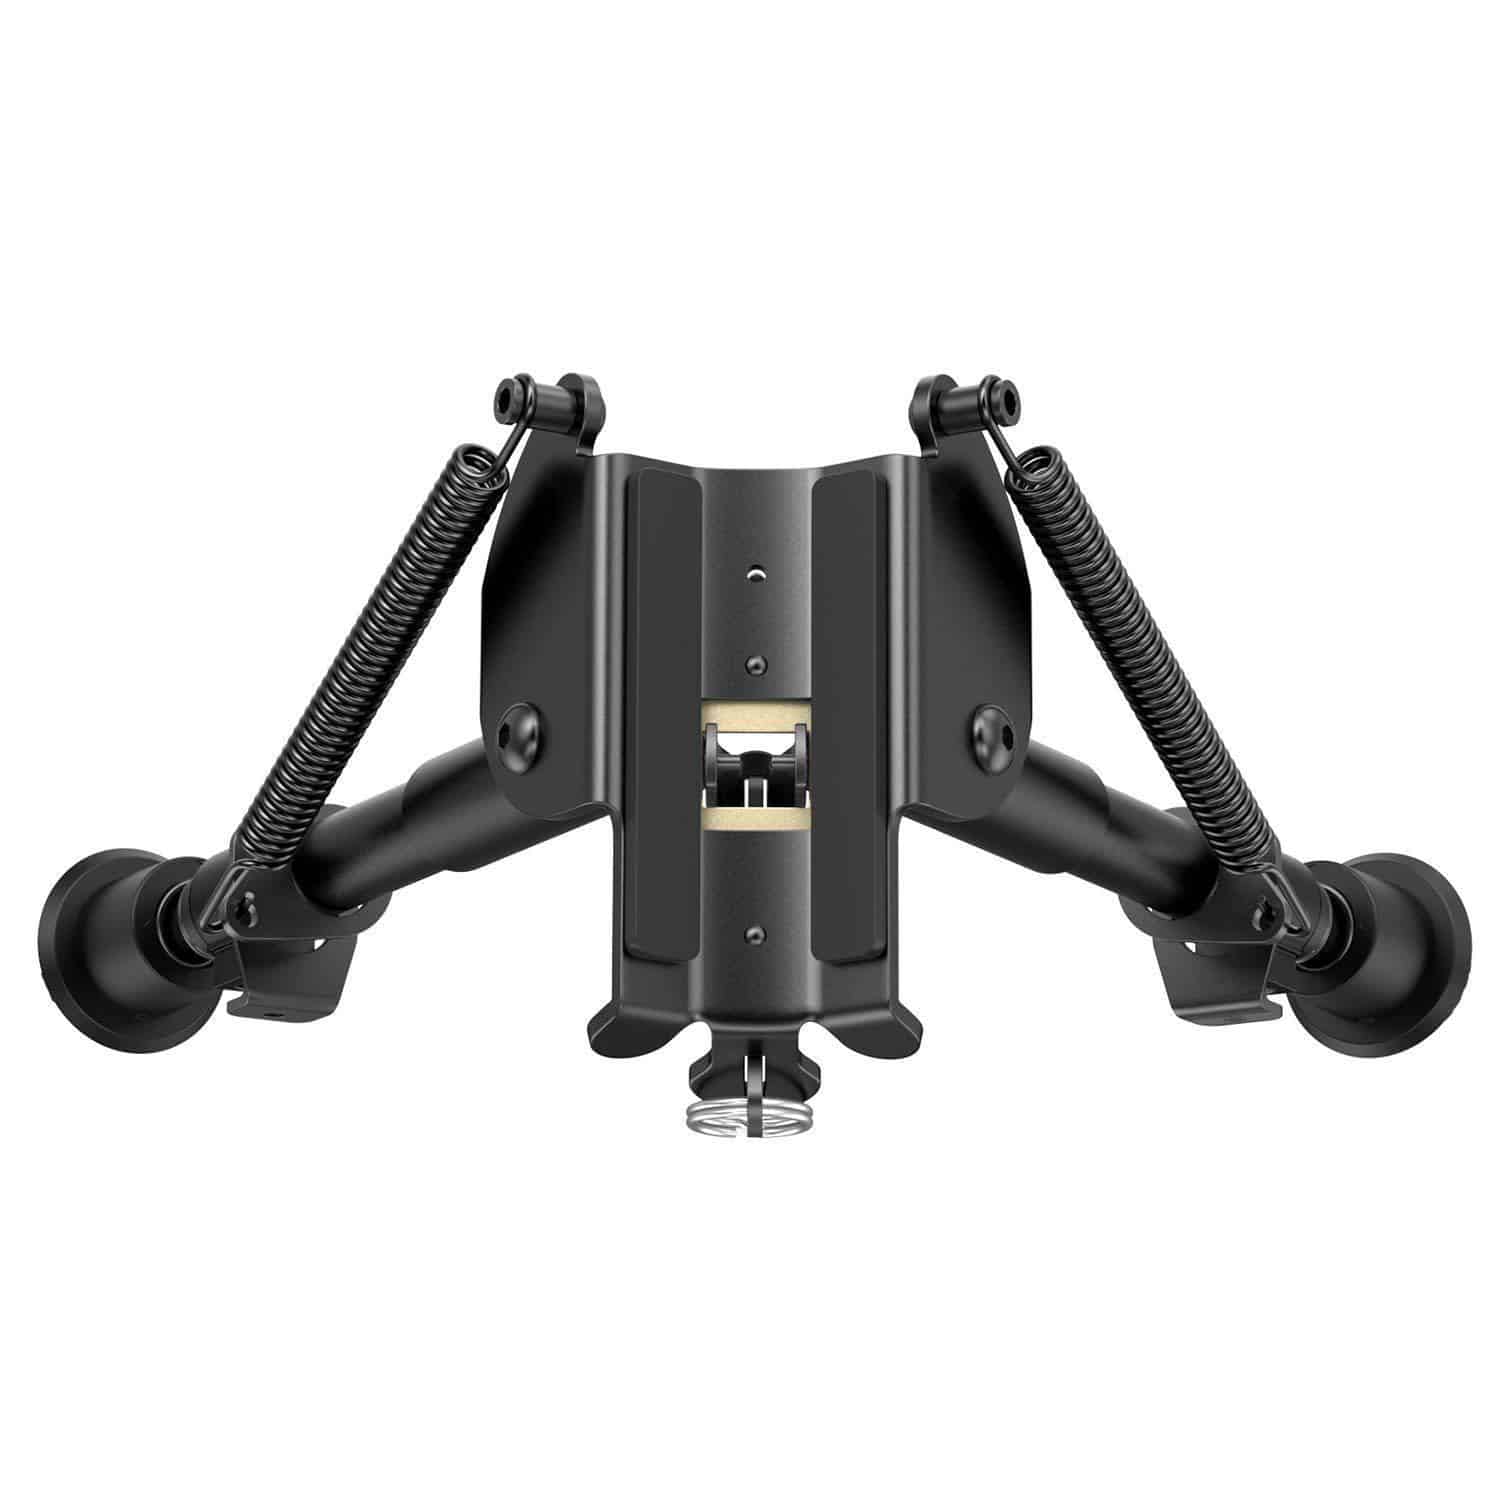 Adjustable Camera Tripod Outdoor Butterfly Bracket Metal Tripode for Phones Foldable 6-9 Inch Retractable Two Foot Stand Holder